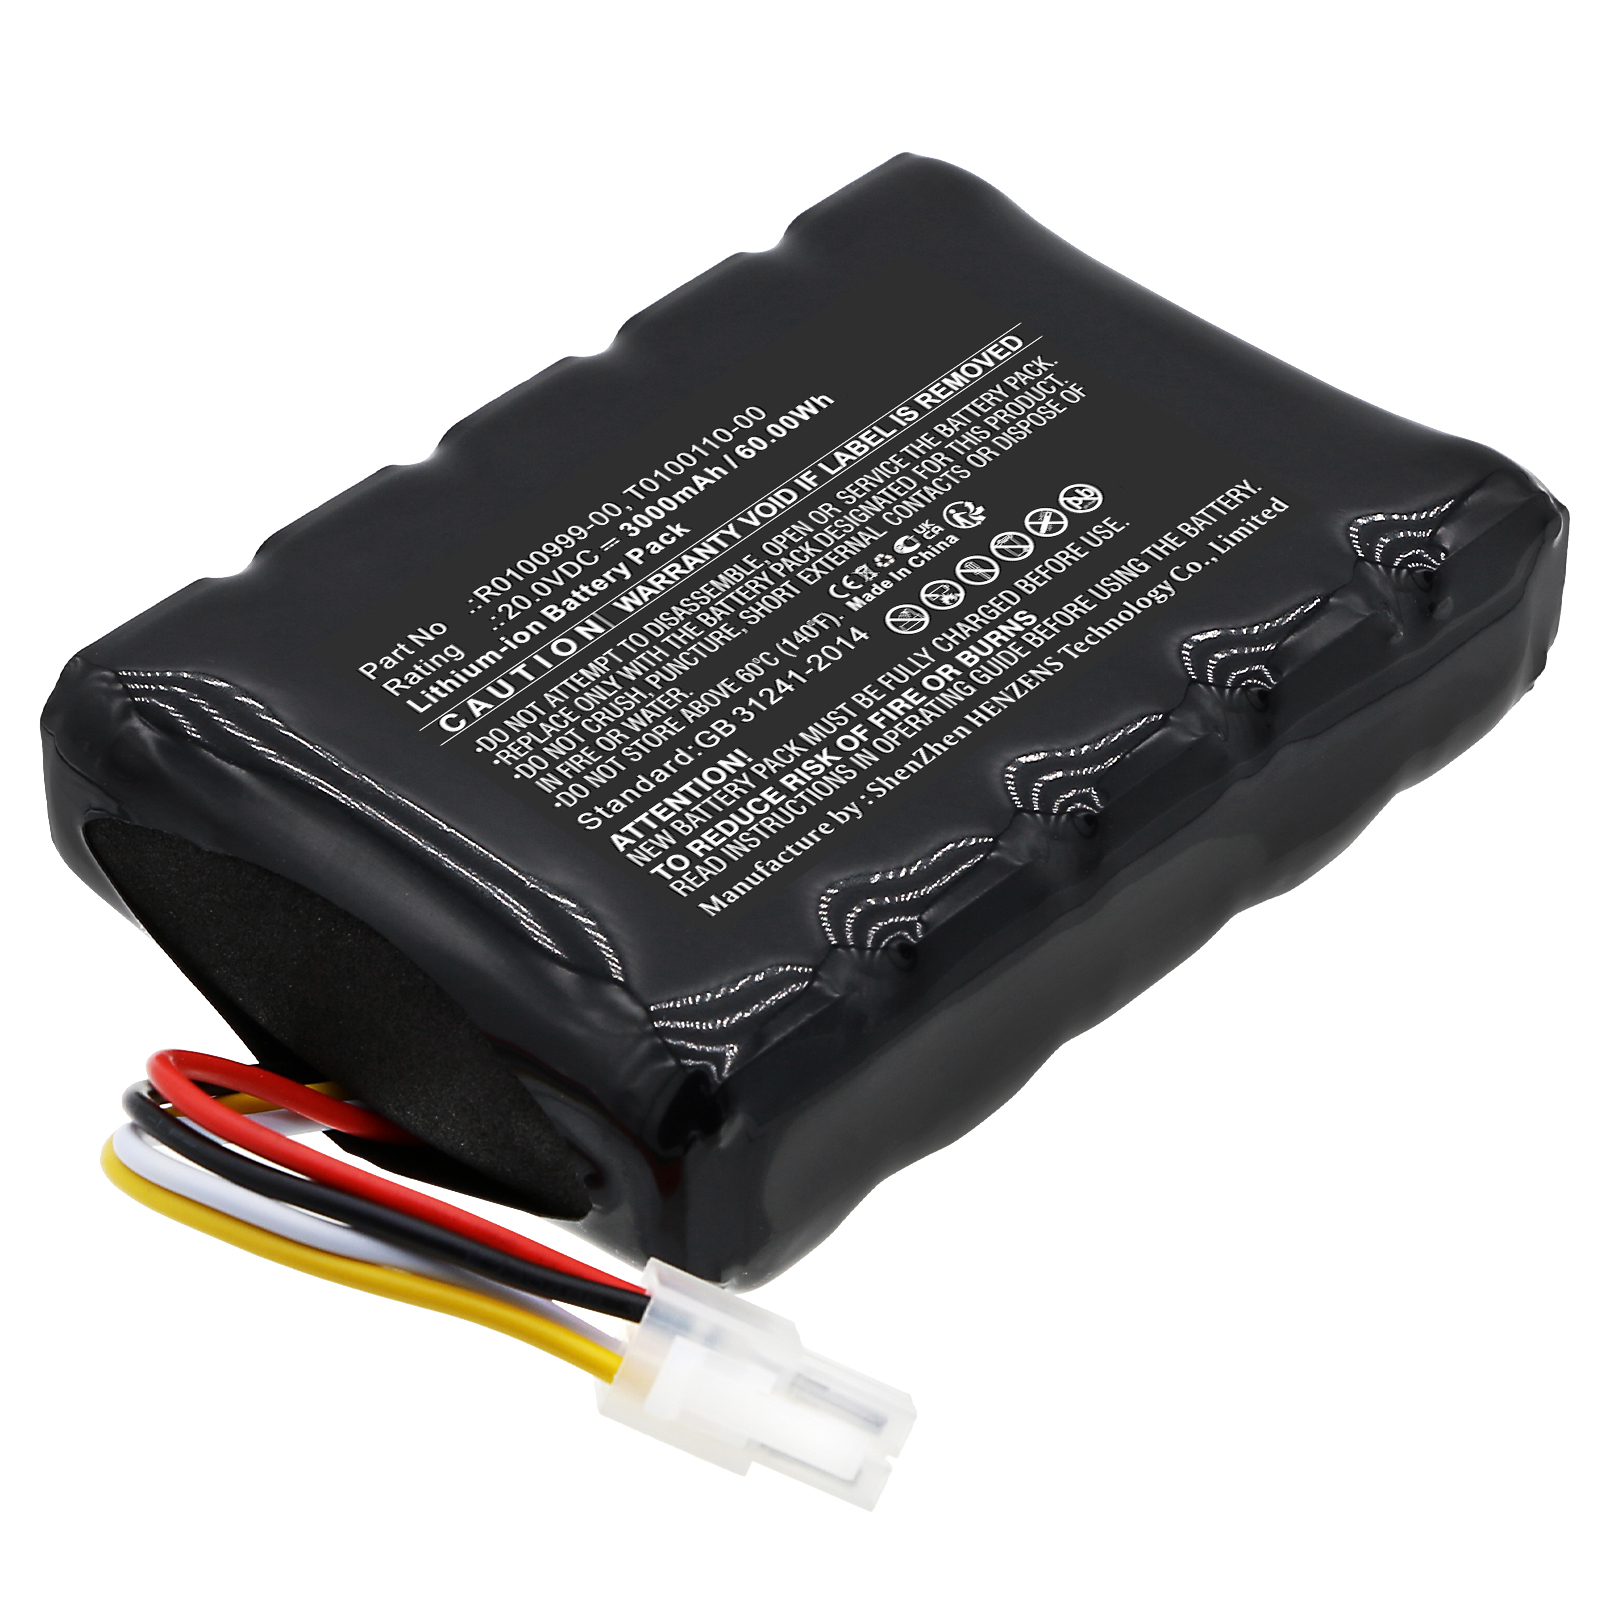 Synergy Digital Lawn Mower Battery, Compatible with Cramer R0100999-00 Lawn Mower Battery (Li-ion, 20V, 3000mAh)